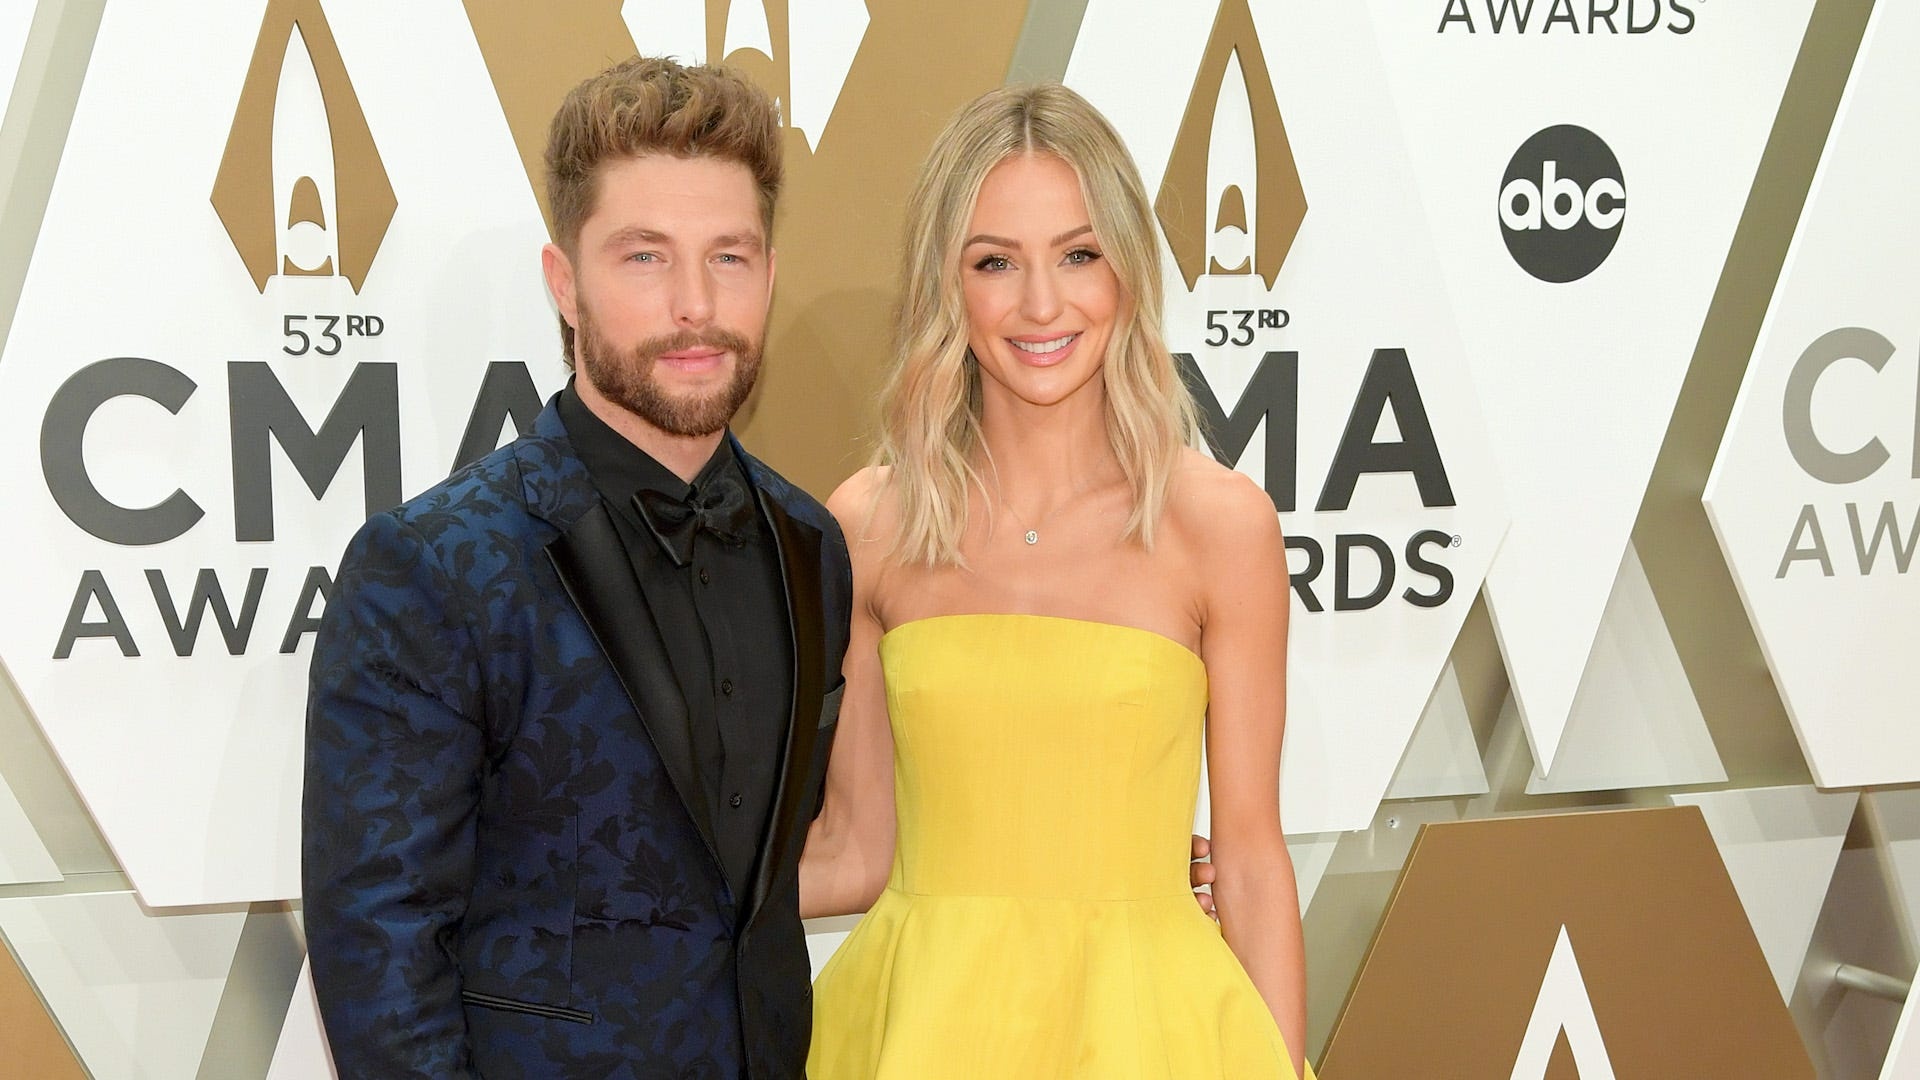 Chris Lane and his wife have another baby on the way 1920x1080